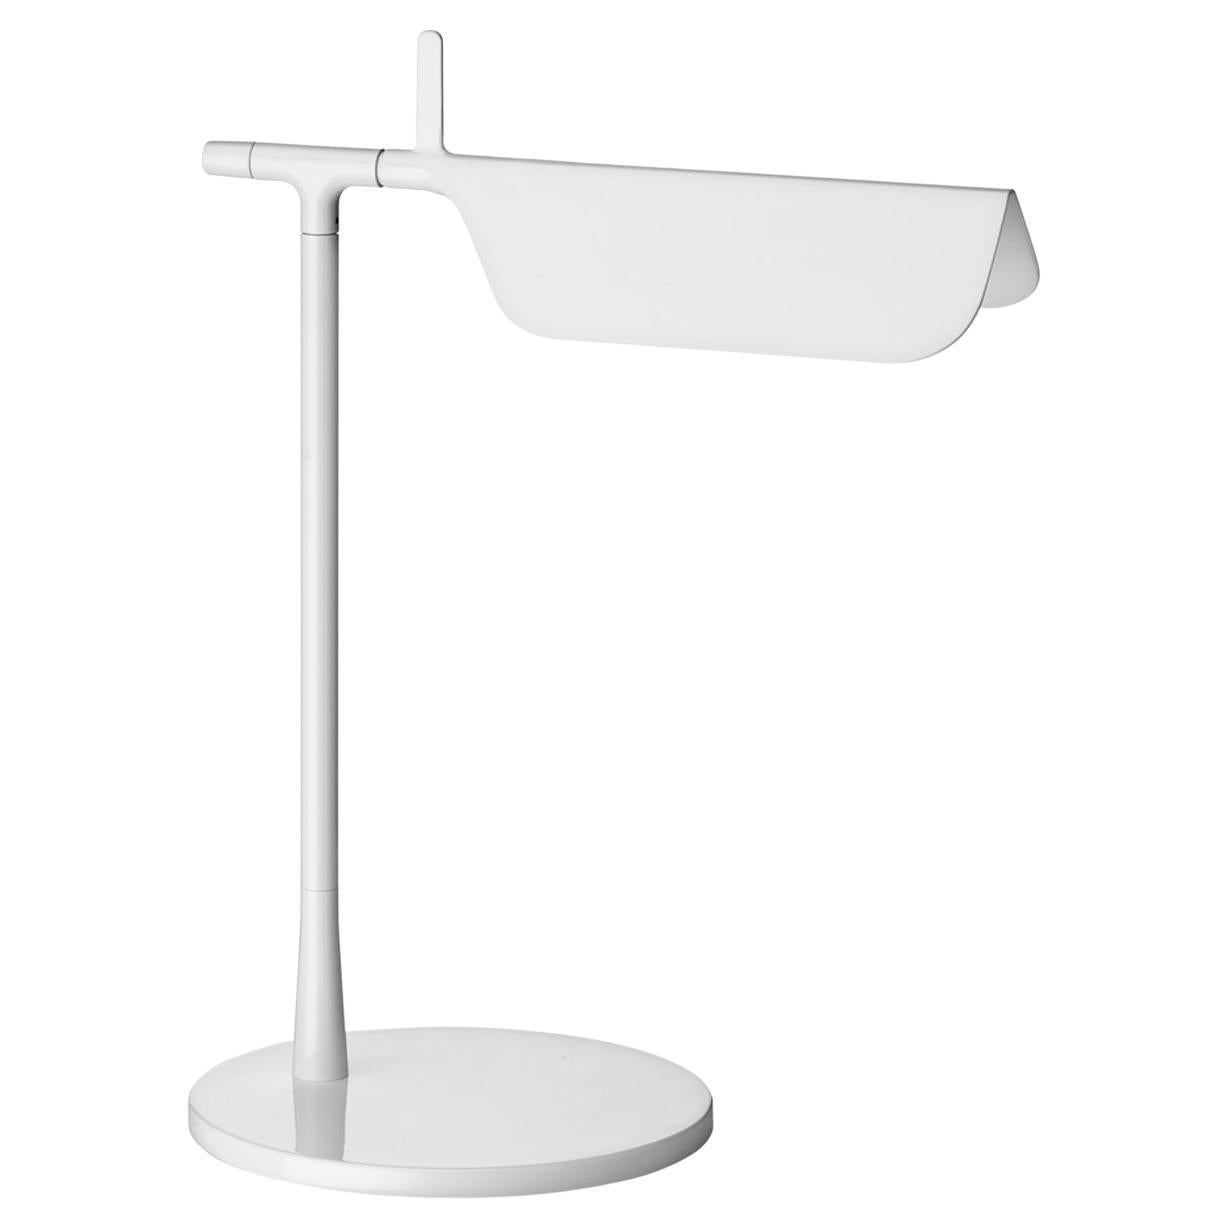 Flos Tab Table LED Lamp 2700K with Dimmer 90° Rotatable Head, White For Sale